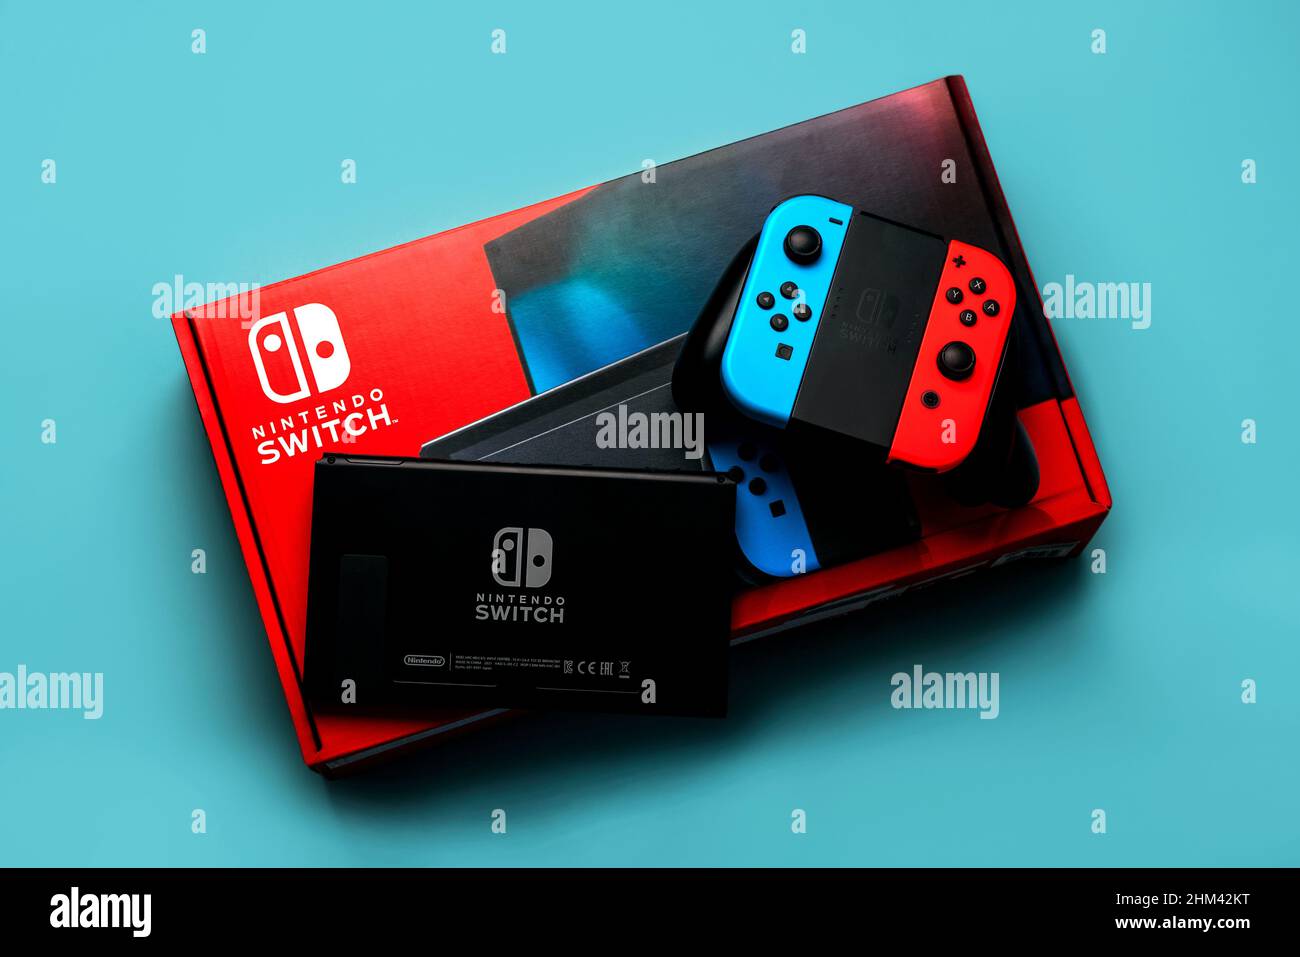 Nintendo Switch video game console box with Nintendo Switch logo, Back of Nintendo Switch and two Joy-Cons over blue background Stock Photo